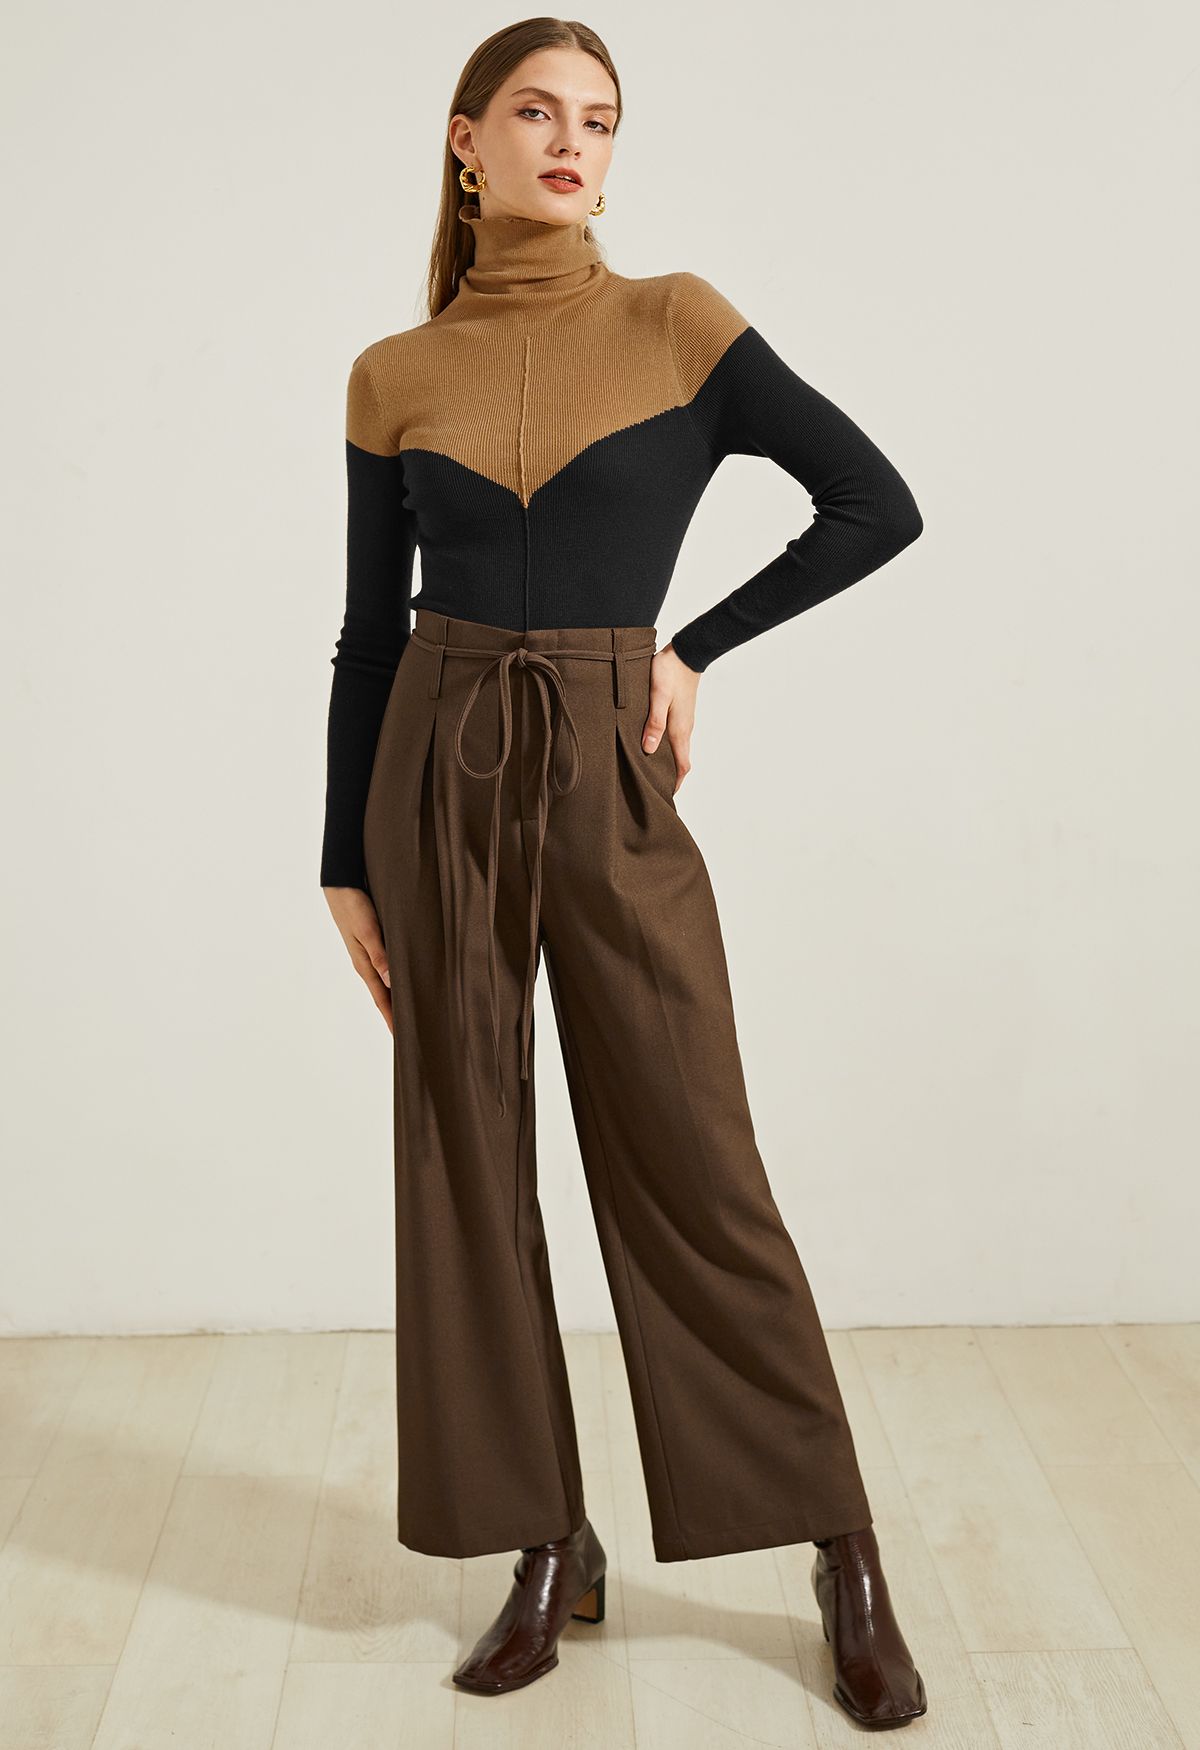 Turtleneck Two-Tone Fitted Knit Top in Black